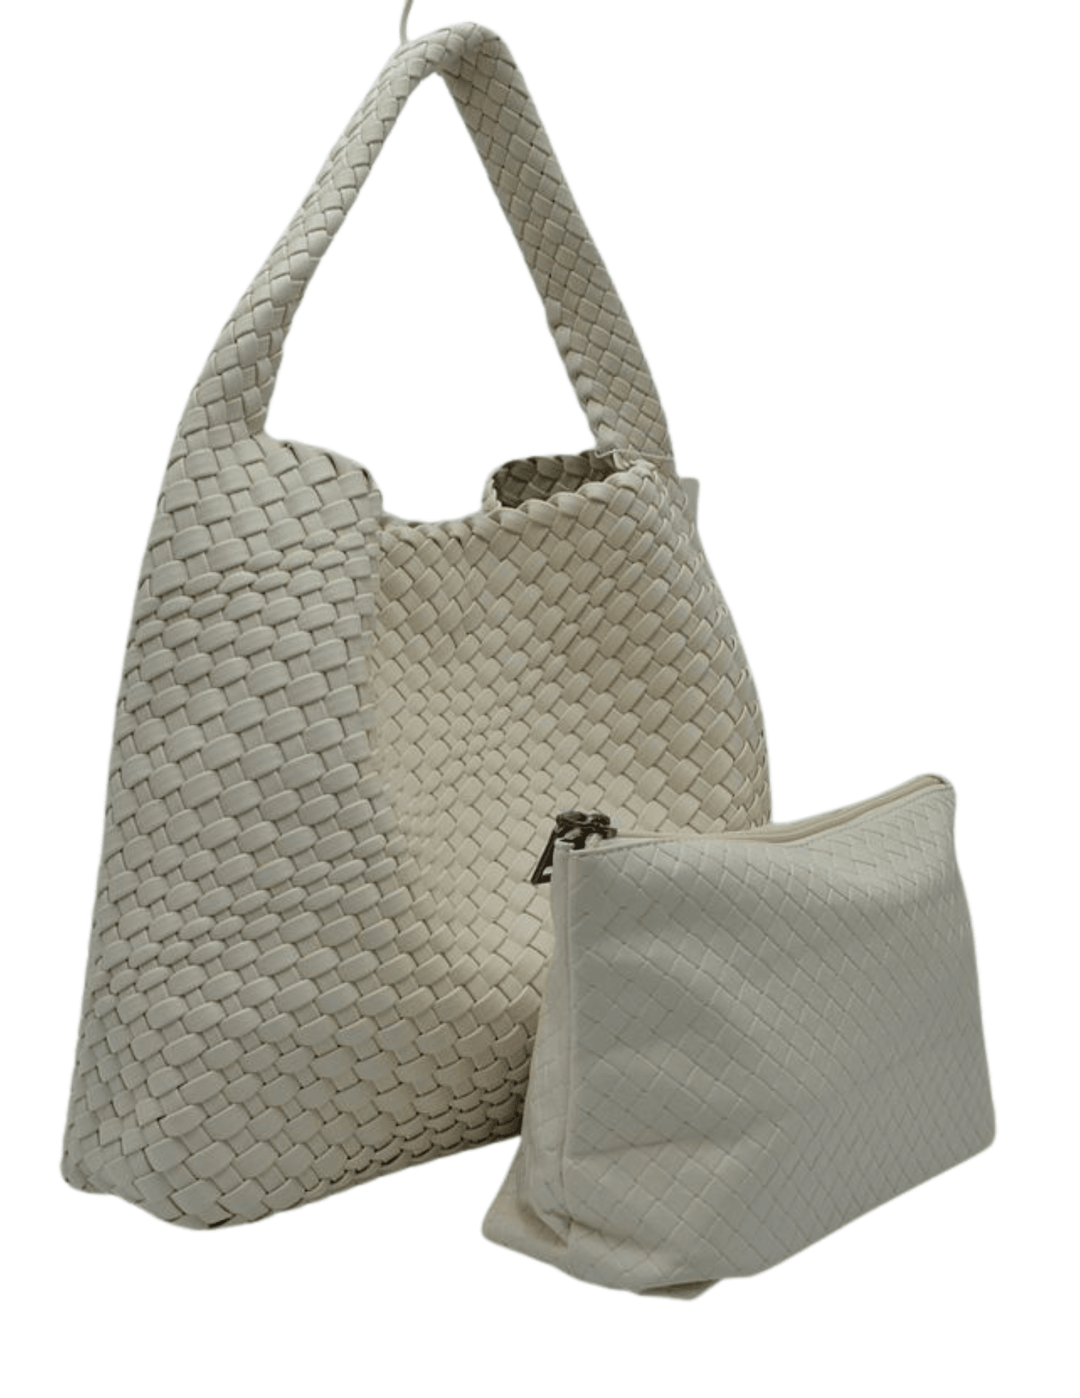 tres chic women's online boutique with off white woven tote bag